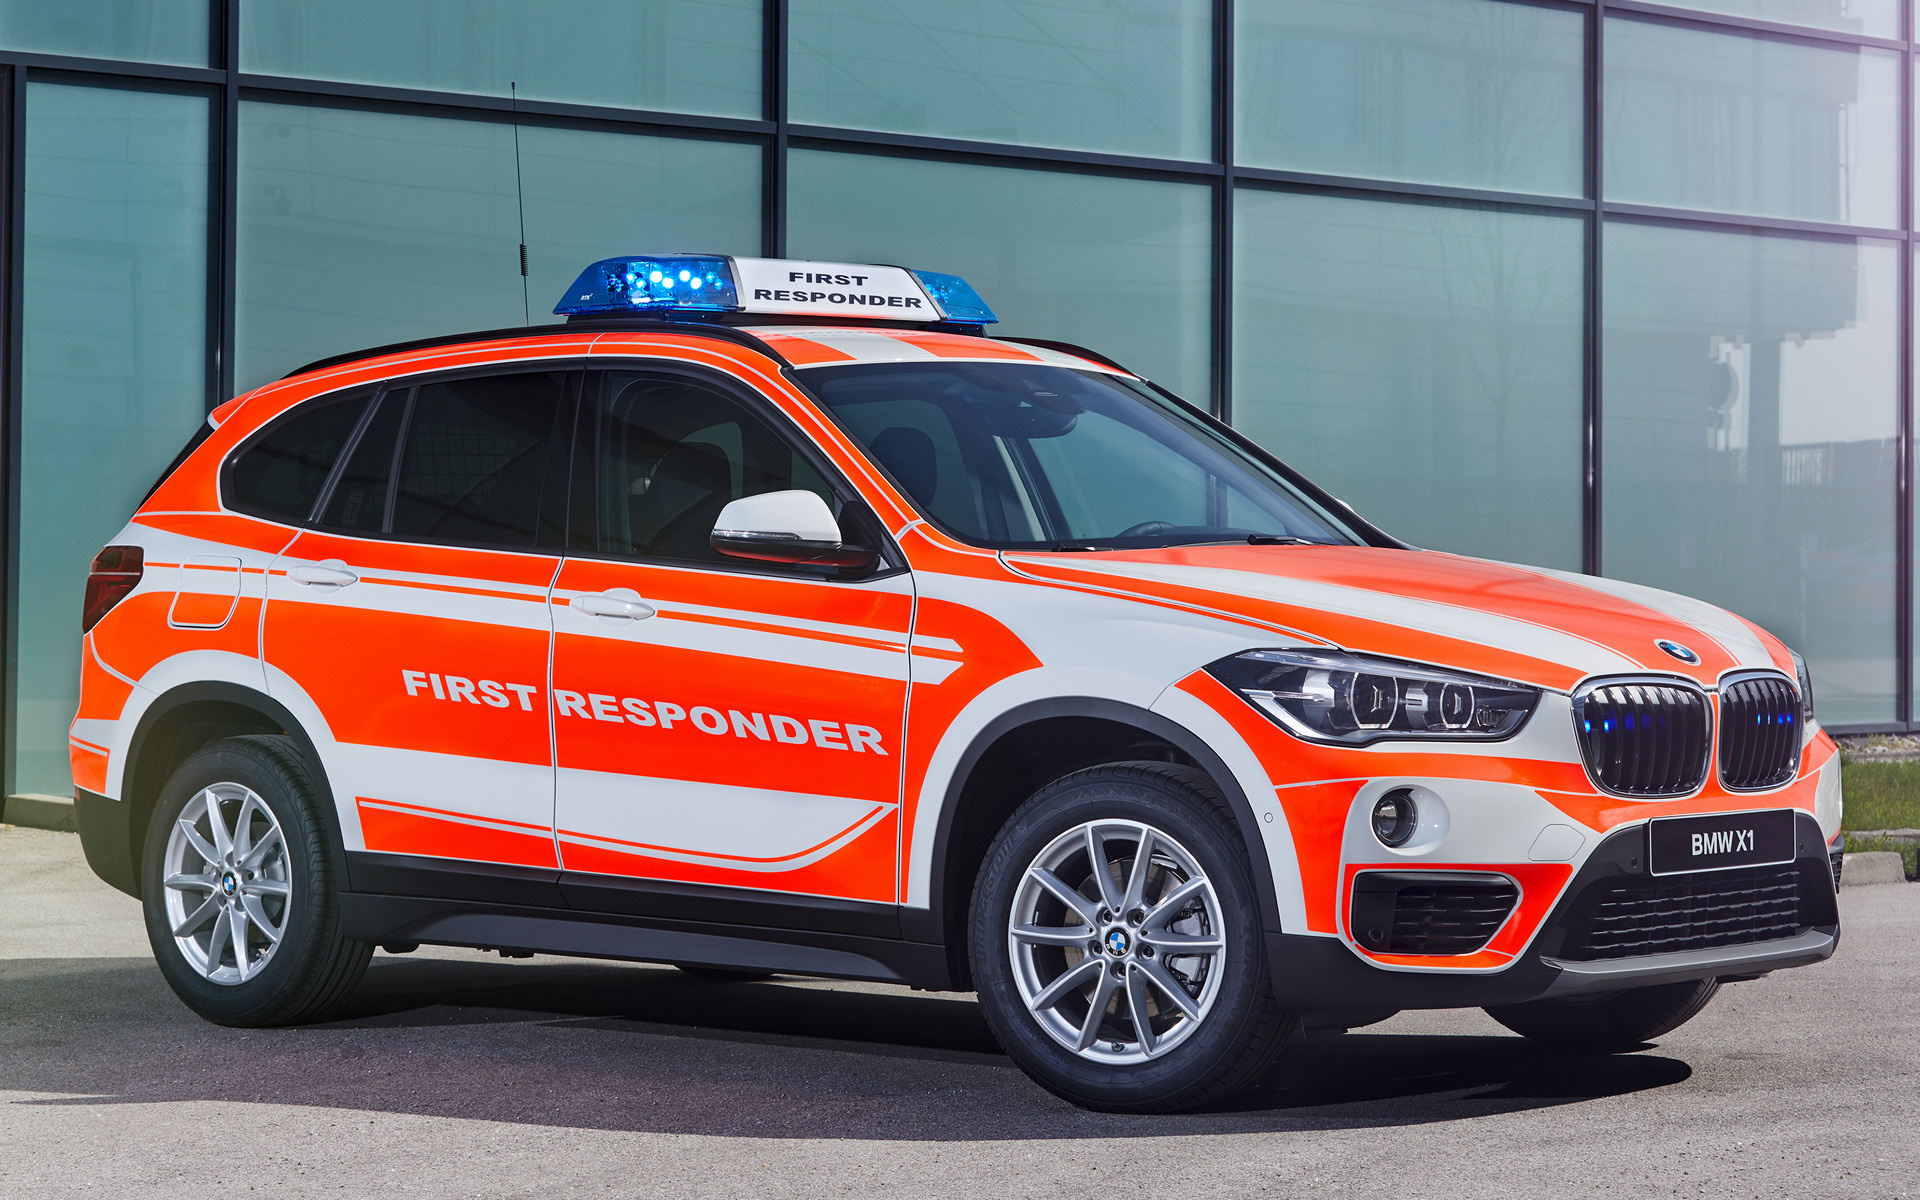 BMW X1 First Responder and HD Image